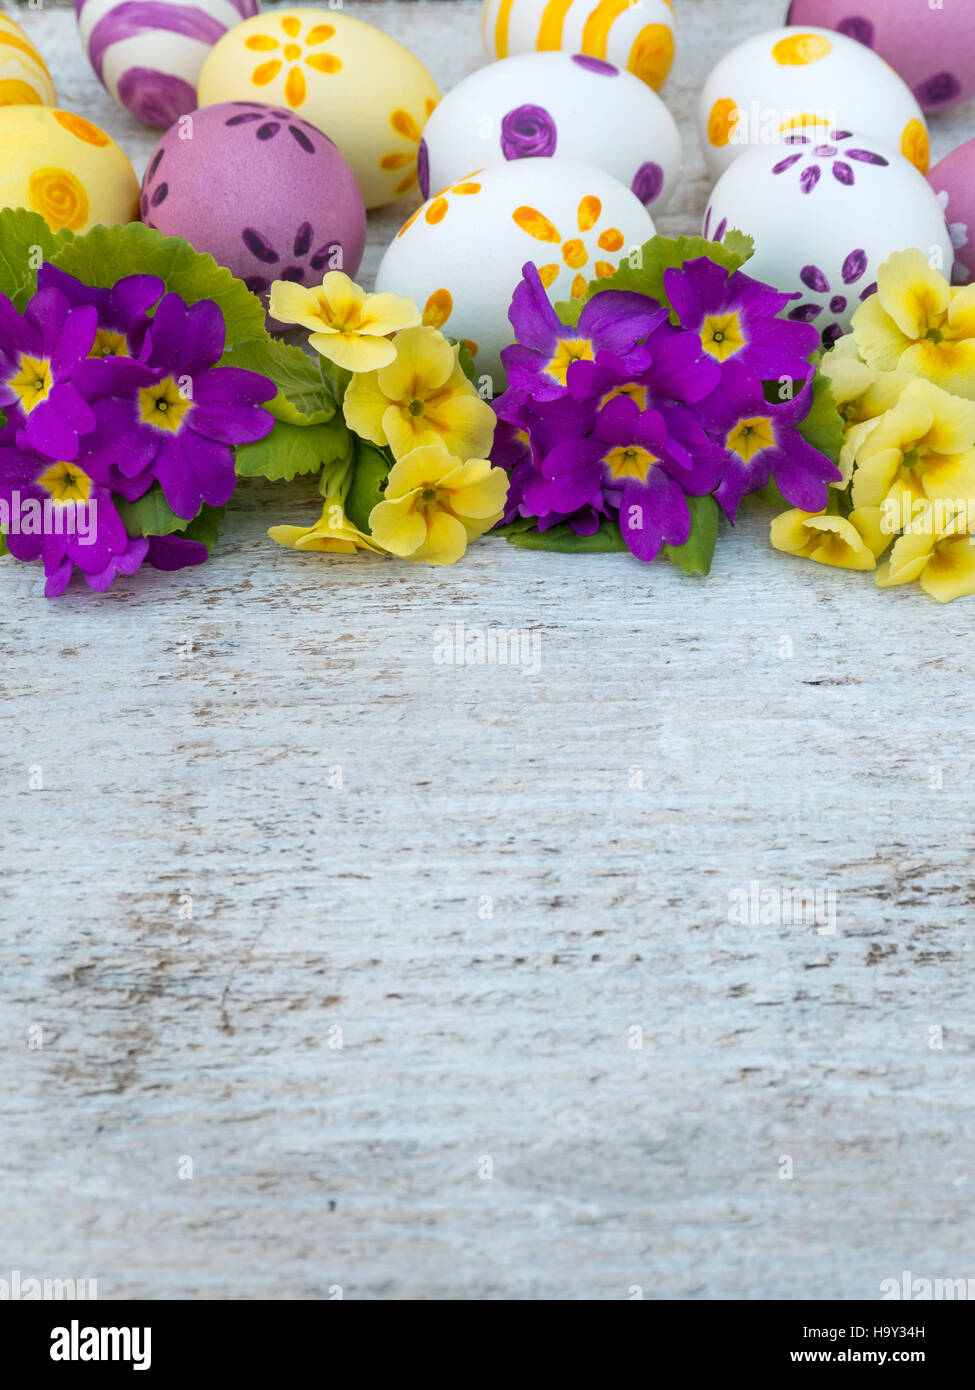 Yellow and violet Easter eggs and primrose flowers bouquet composition Stock Photo